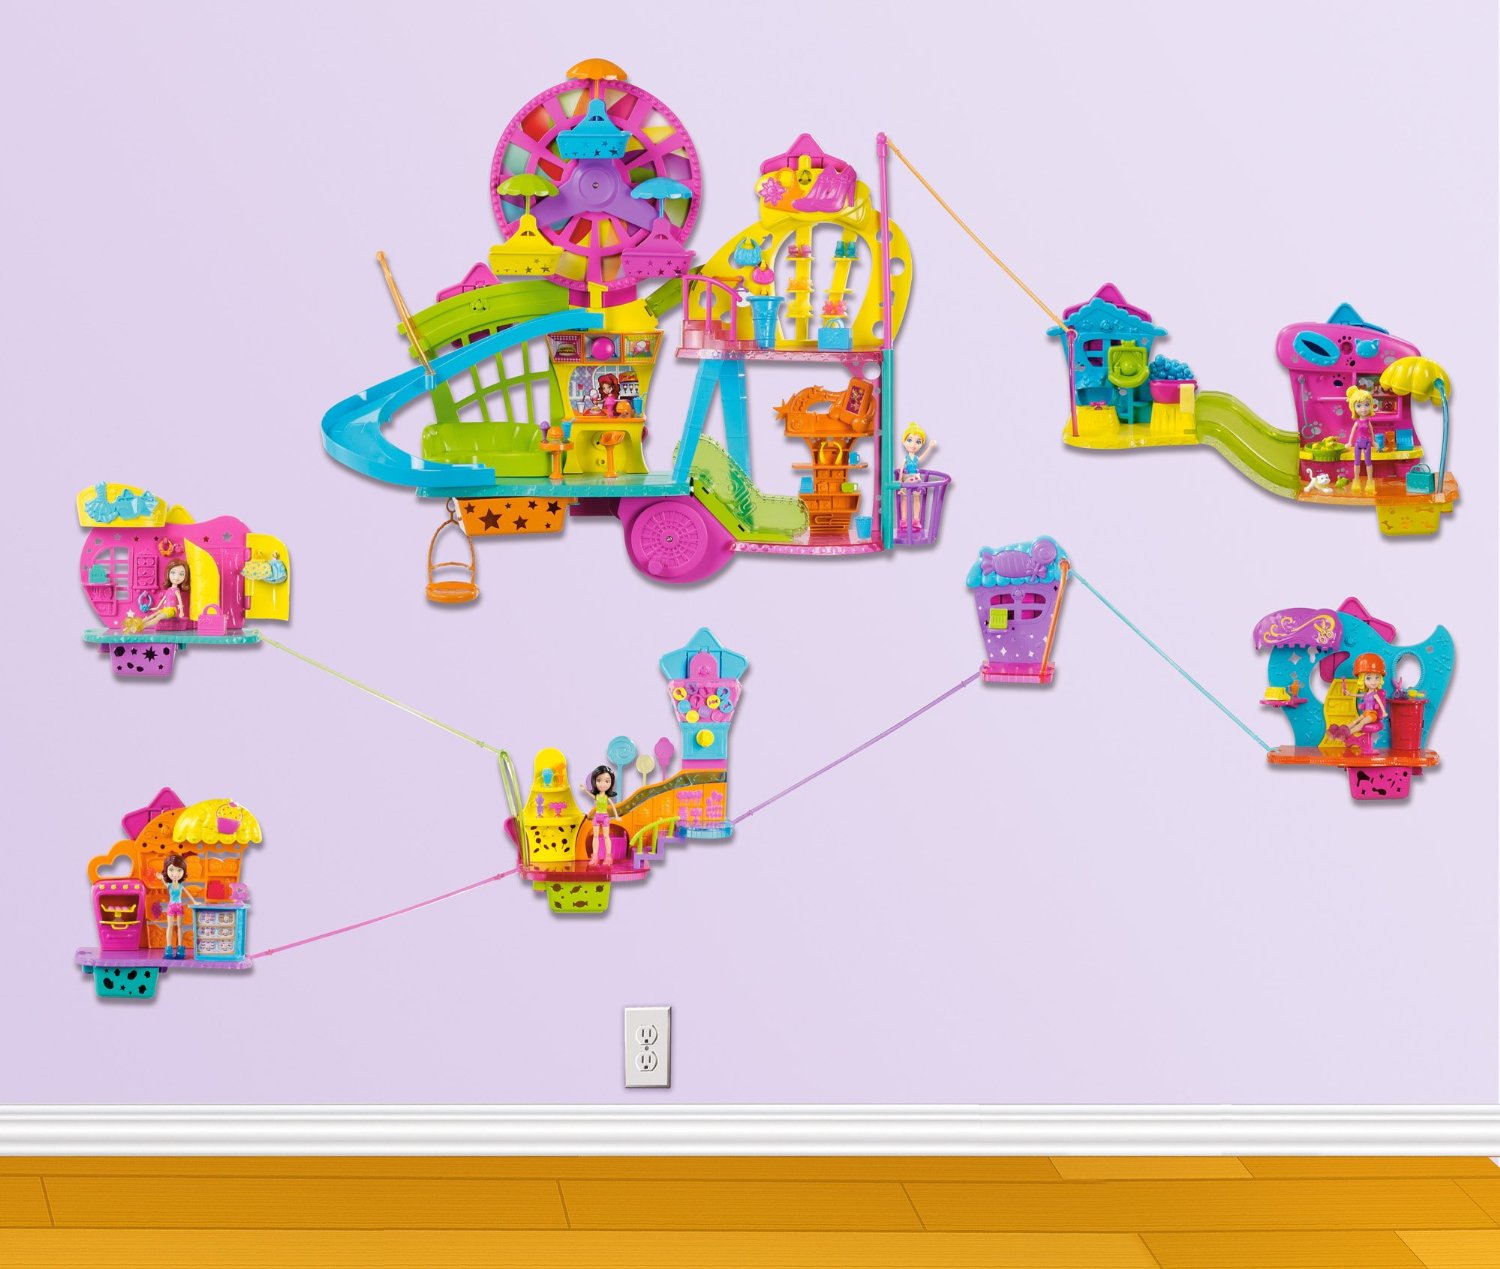 Polly Pocket Ultimate Wall Party Buildup Playset Only $25.20 (Reg. $94.99)